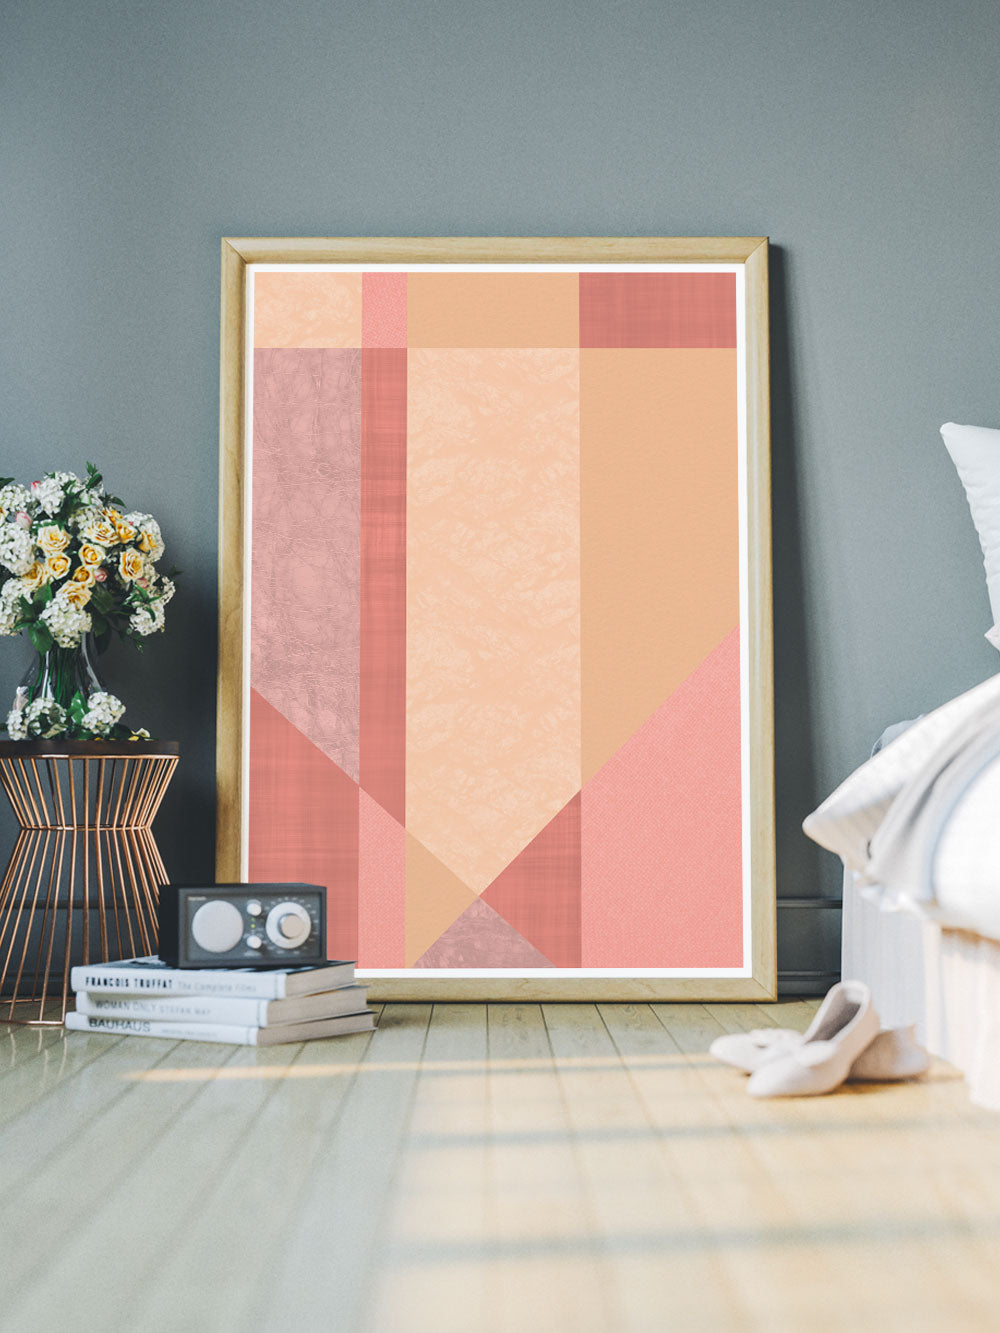 Shrine Geometric Abstract Art Print in a bedroom